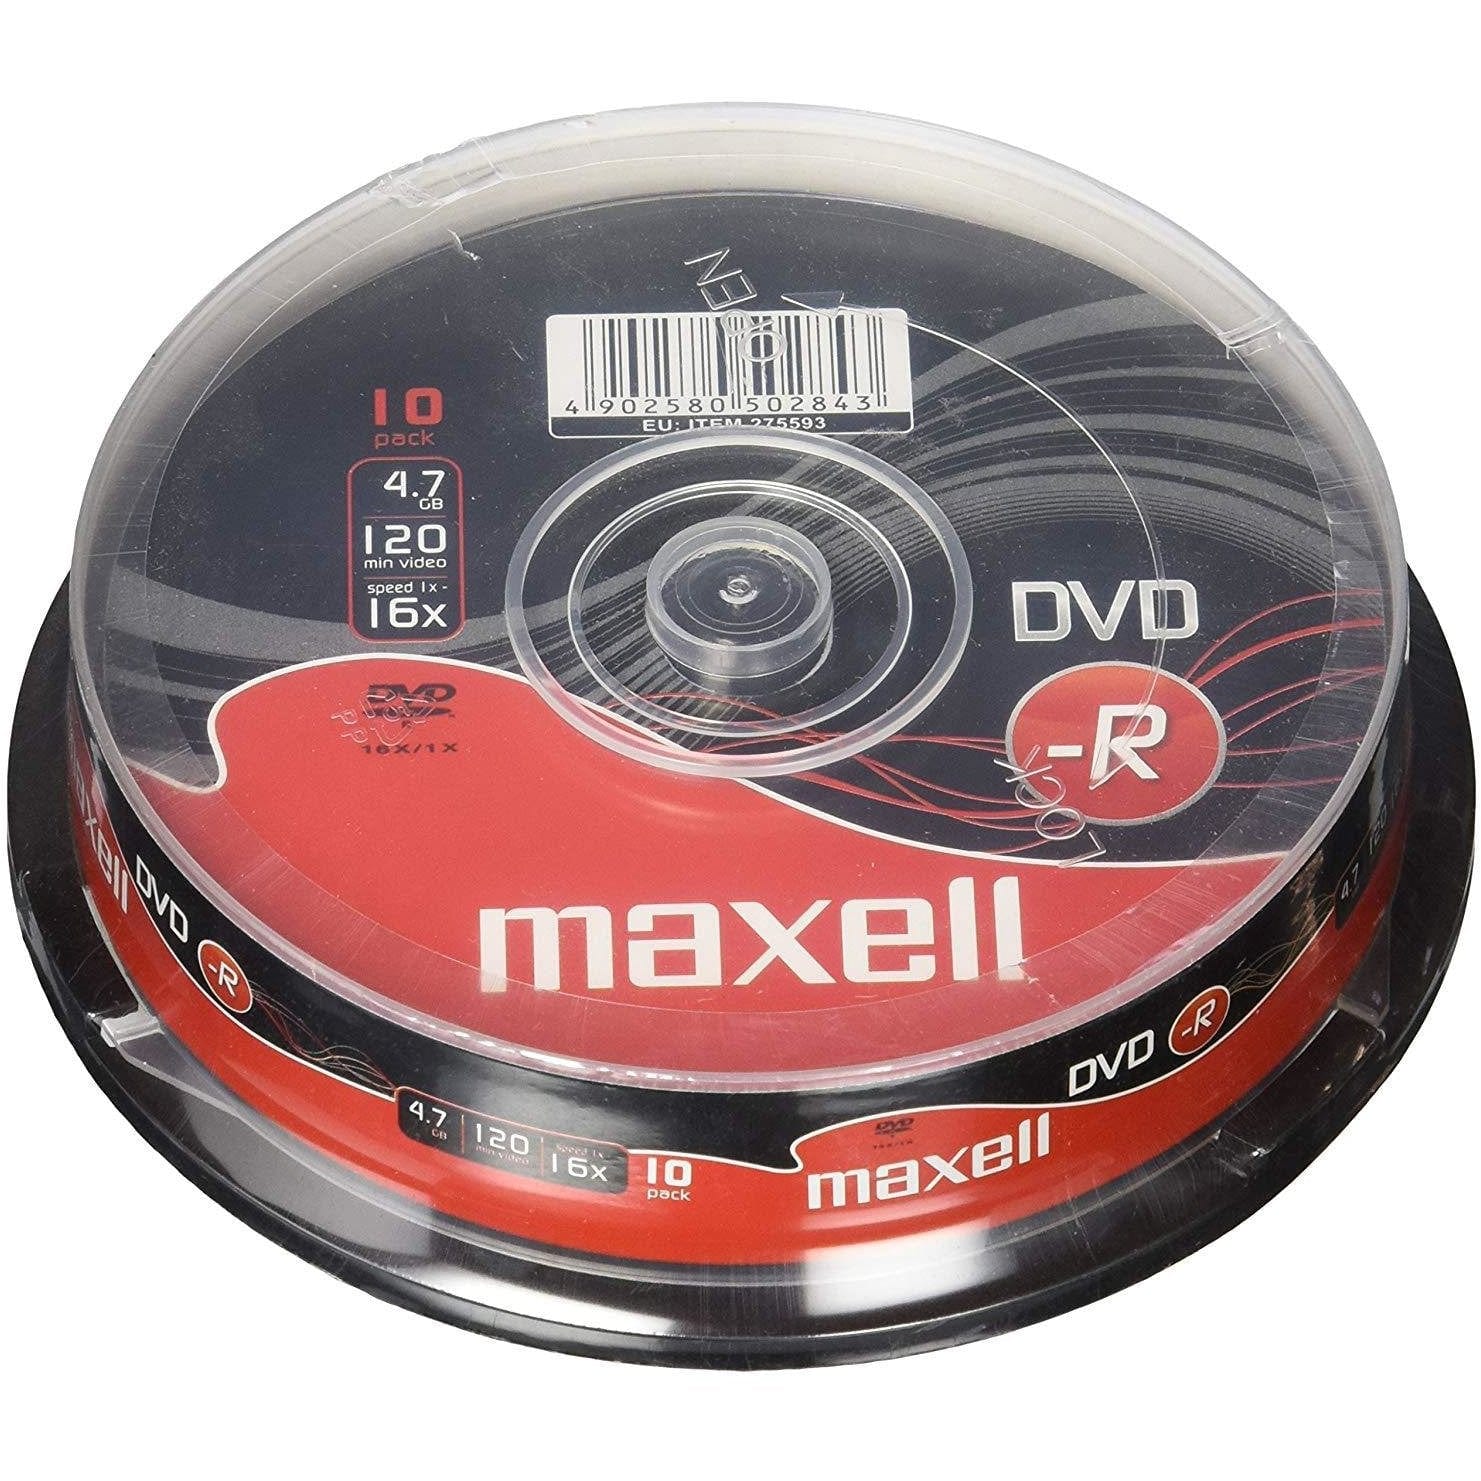 Dvd Minus R 10pc Spindle 16X [Accessories]